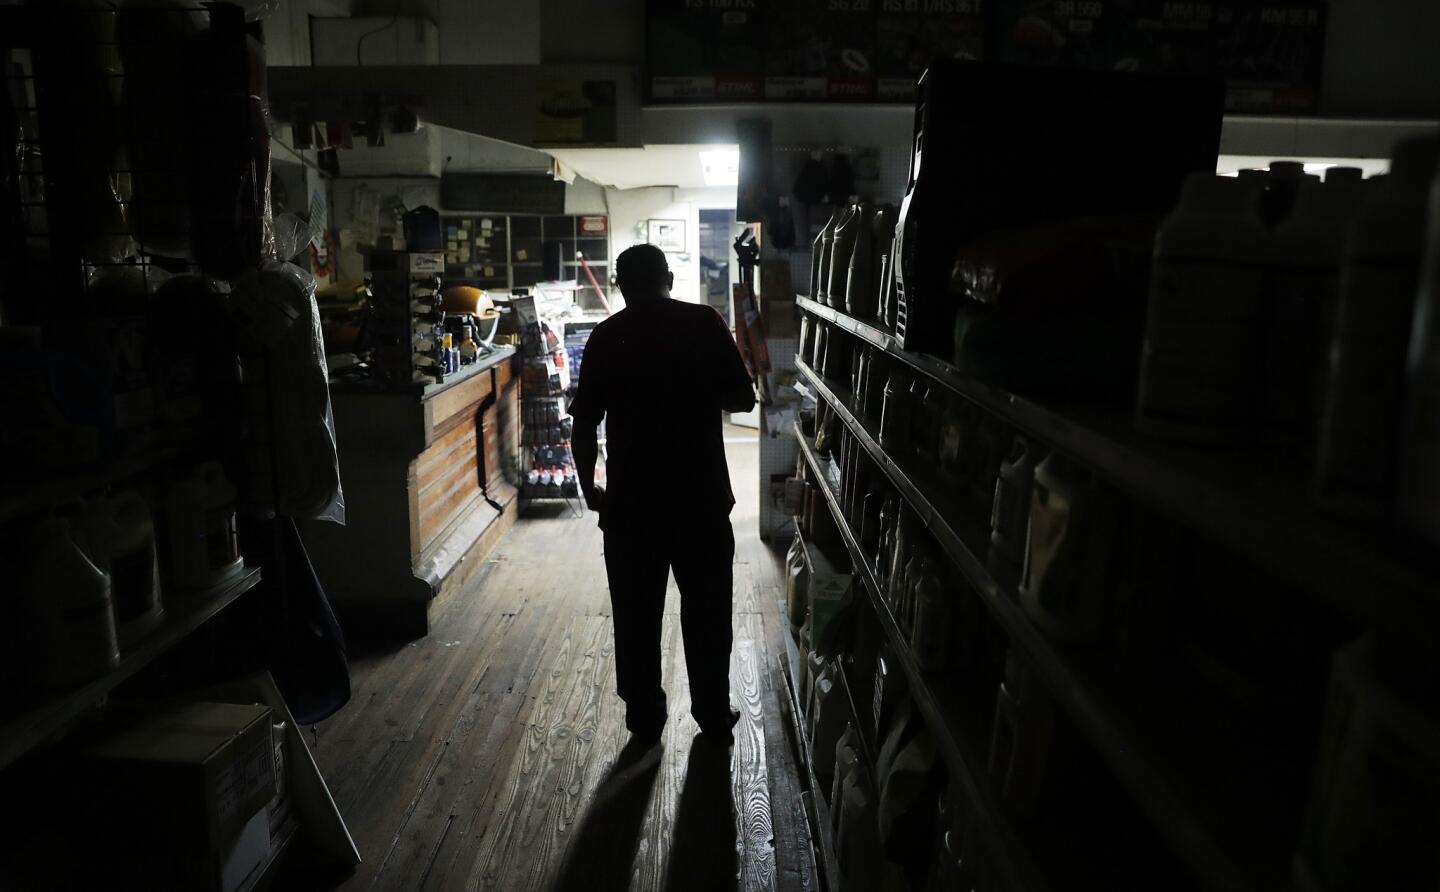 Trey Tait watches over his store, Tait's Lawn Products, illuminated by a generator after the power went out from Hurricane Matthew in Brunswick, Ga., on Oct. 7, 2016.